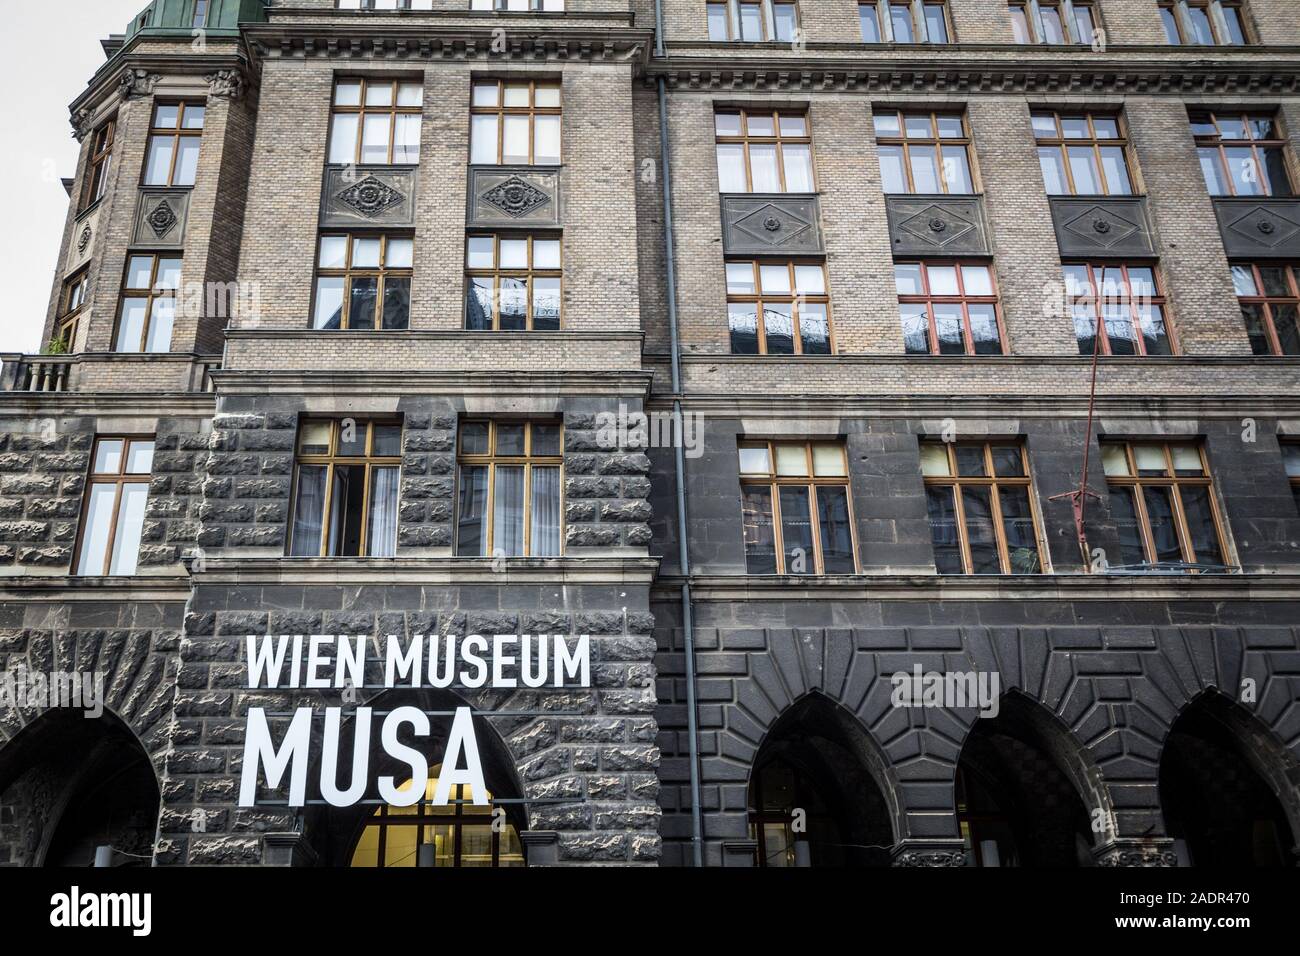 VIENNA, AUSTRIA - NOVEMBER 6, 2019: Main entrance to the Wien Museum MUSA, also called startgalerie artothek. MUSA is a contemporary art museum and mo Stock Photo